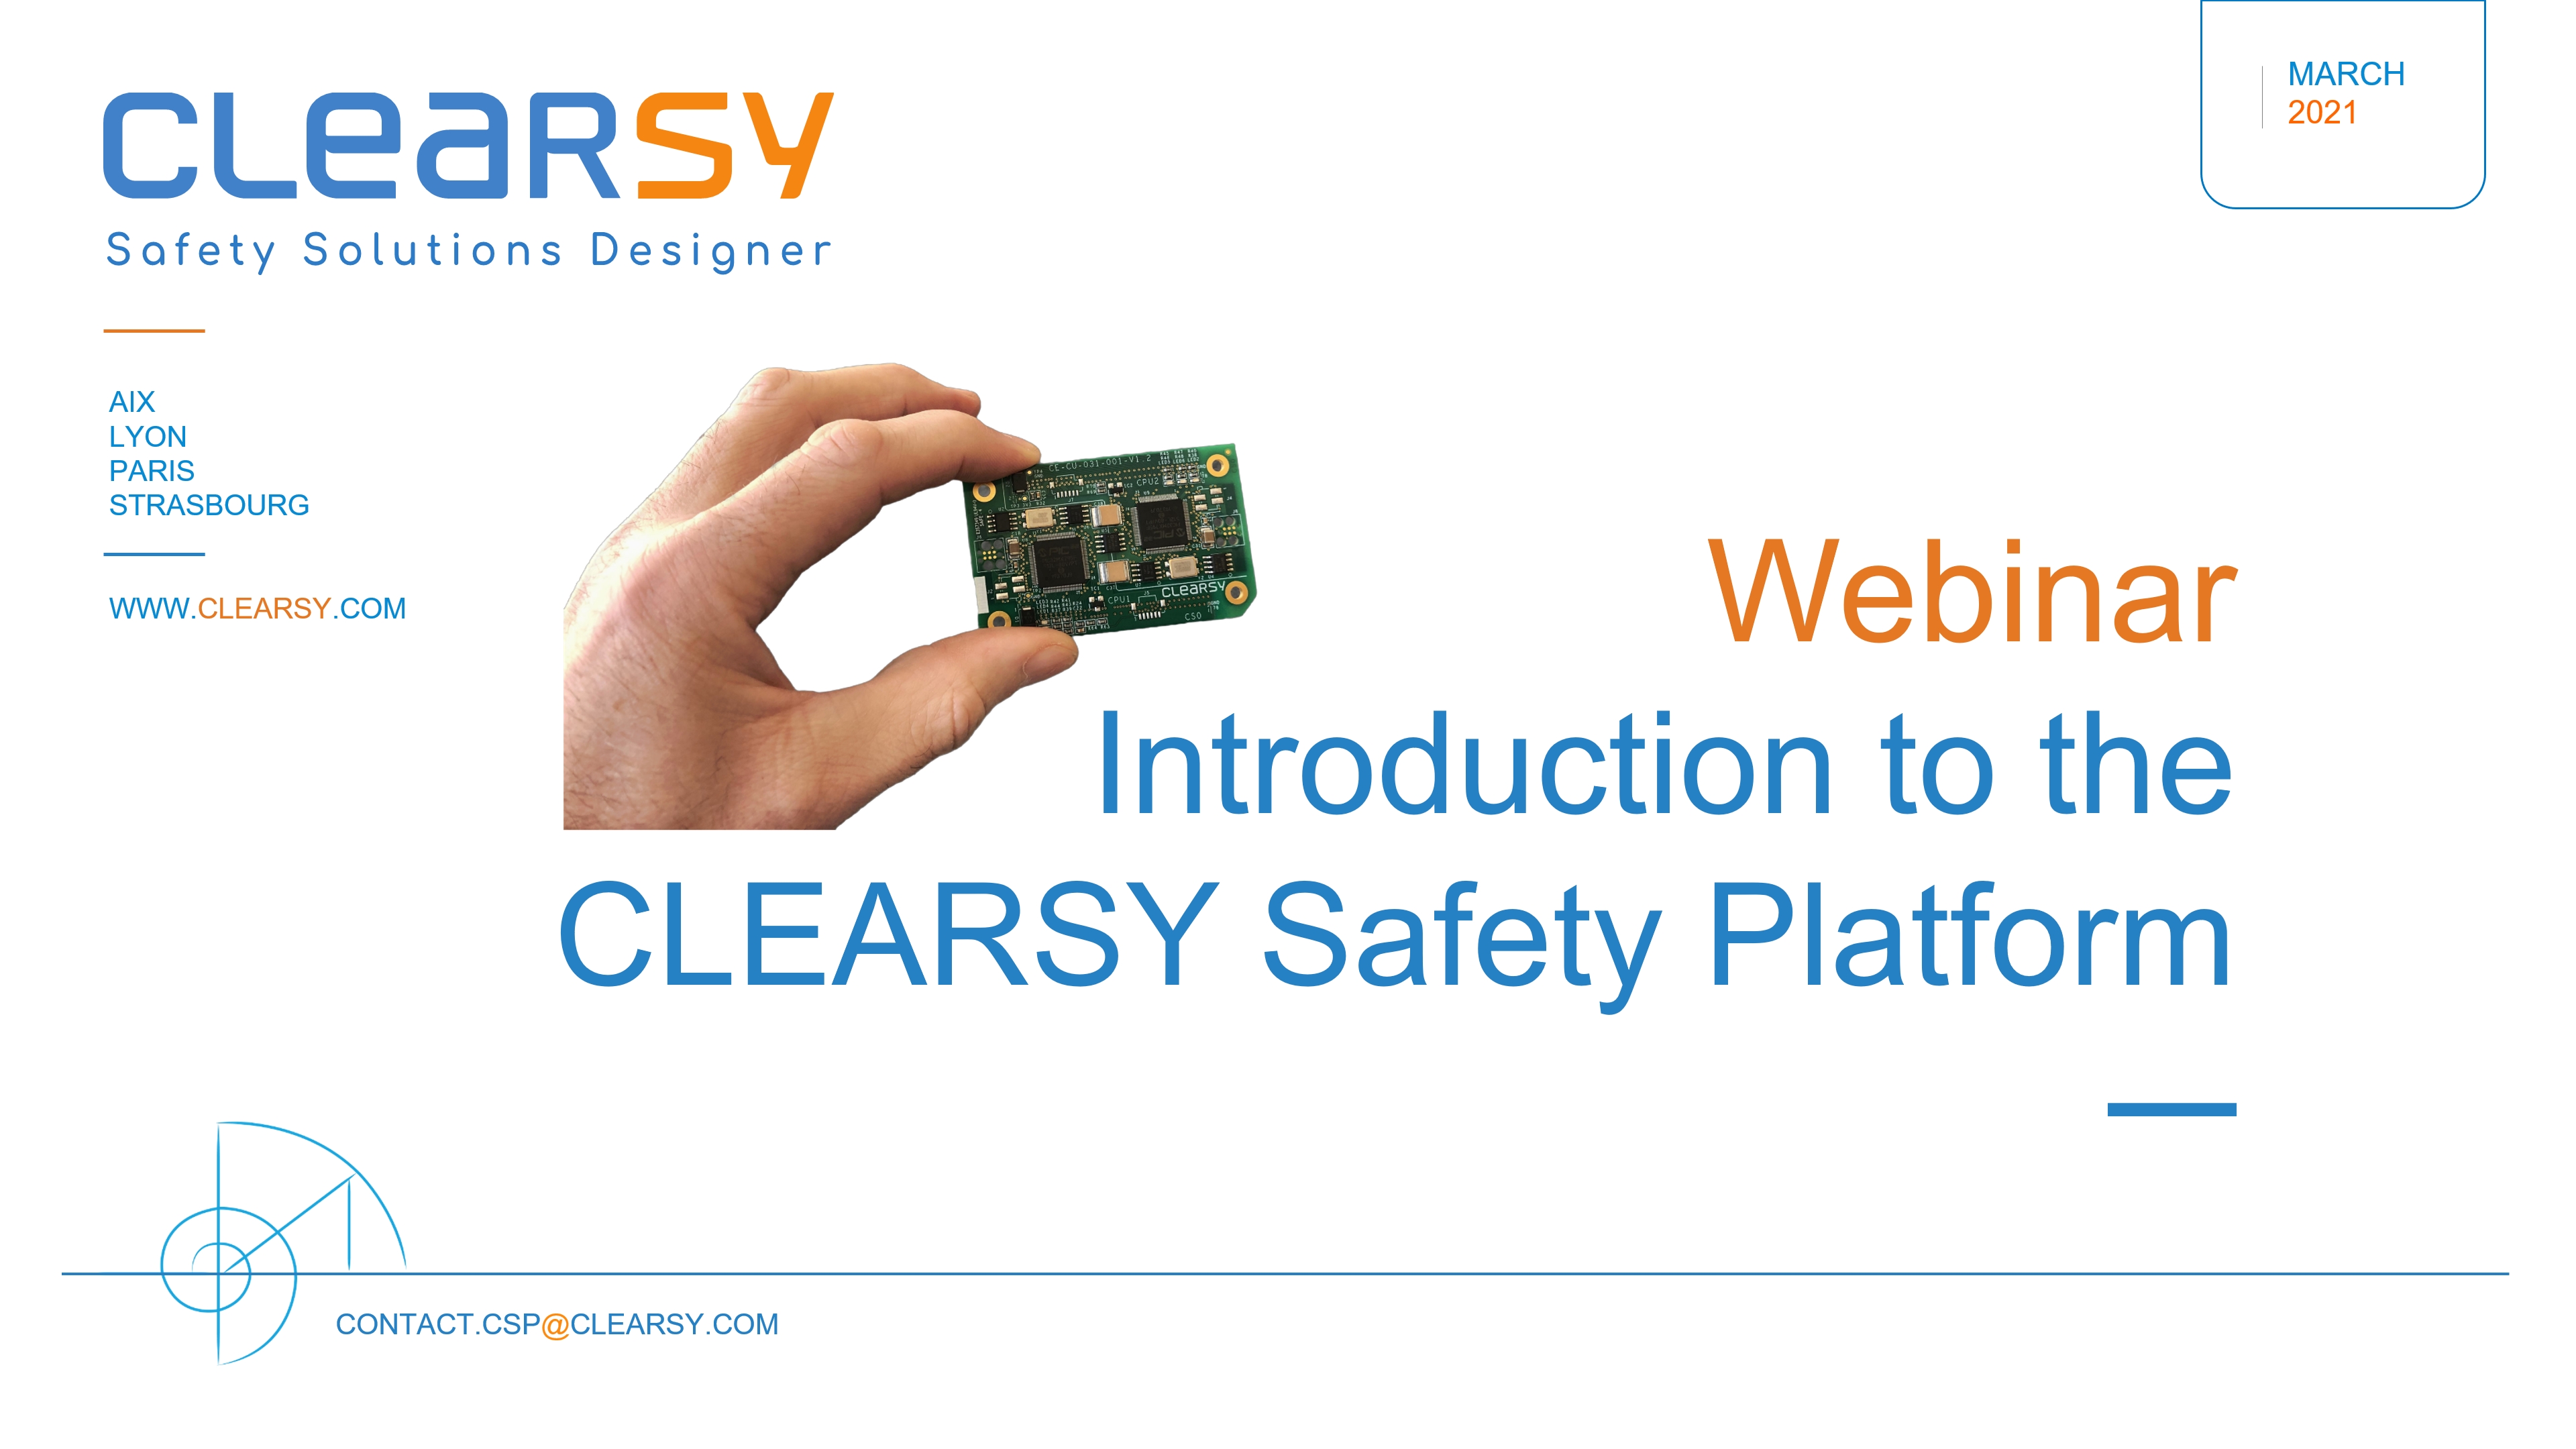 Video published of the webinar “introduction to the CLEARSY Safety Platform”